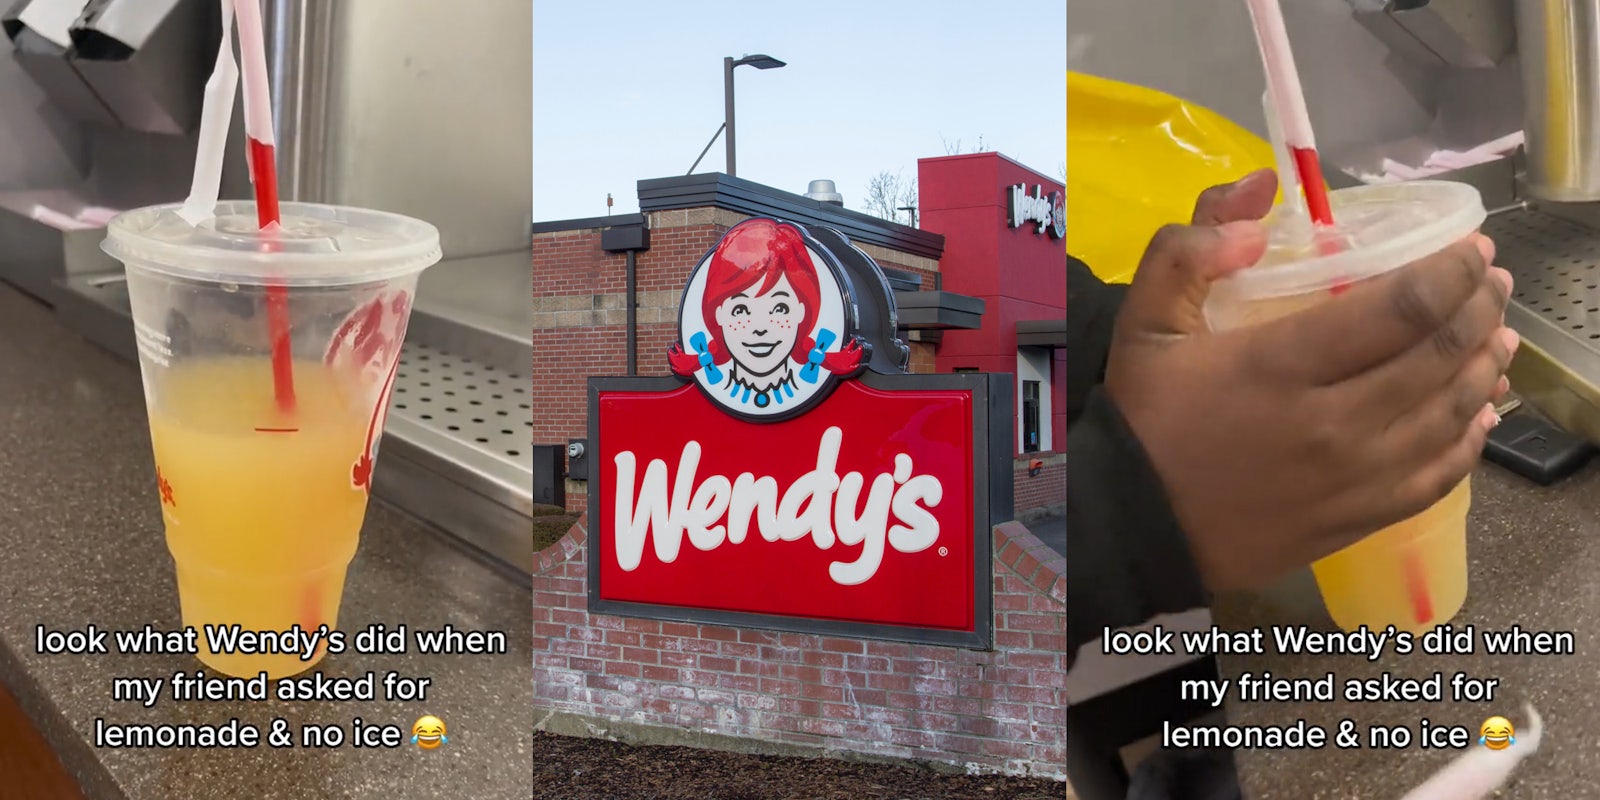 Wendy's lemonade half full with caption 'look what Wendy's did when my friend asked for lemonade & no ice' (l) Wendy's building with sign out front (c) Wendy's lemonade half full in hands with caption 'look what Wendy's did when my friend asked for lemonade & no ice' (r)